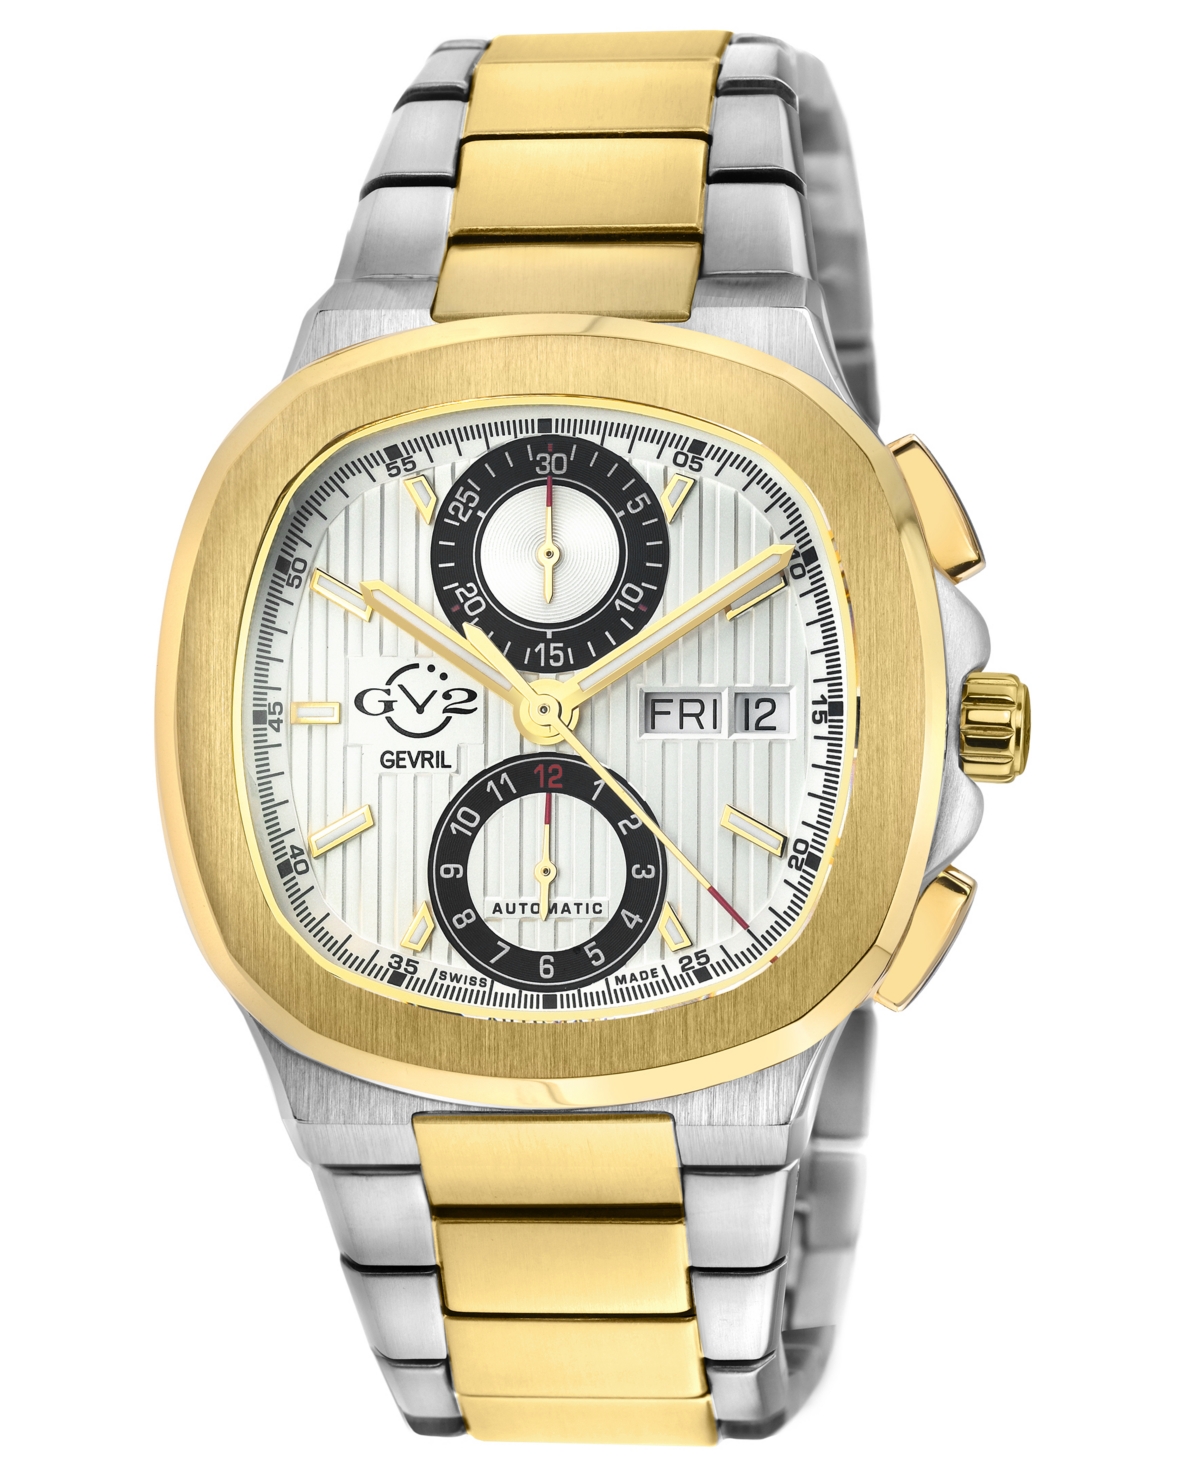 Men's Potente Chronograph Swiss Automatic Two-Tone Stainless Steel Watch 40mm - Silver